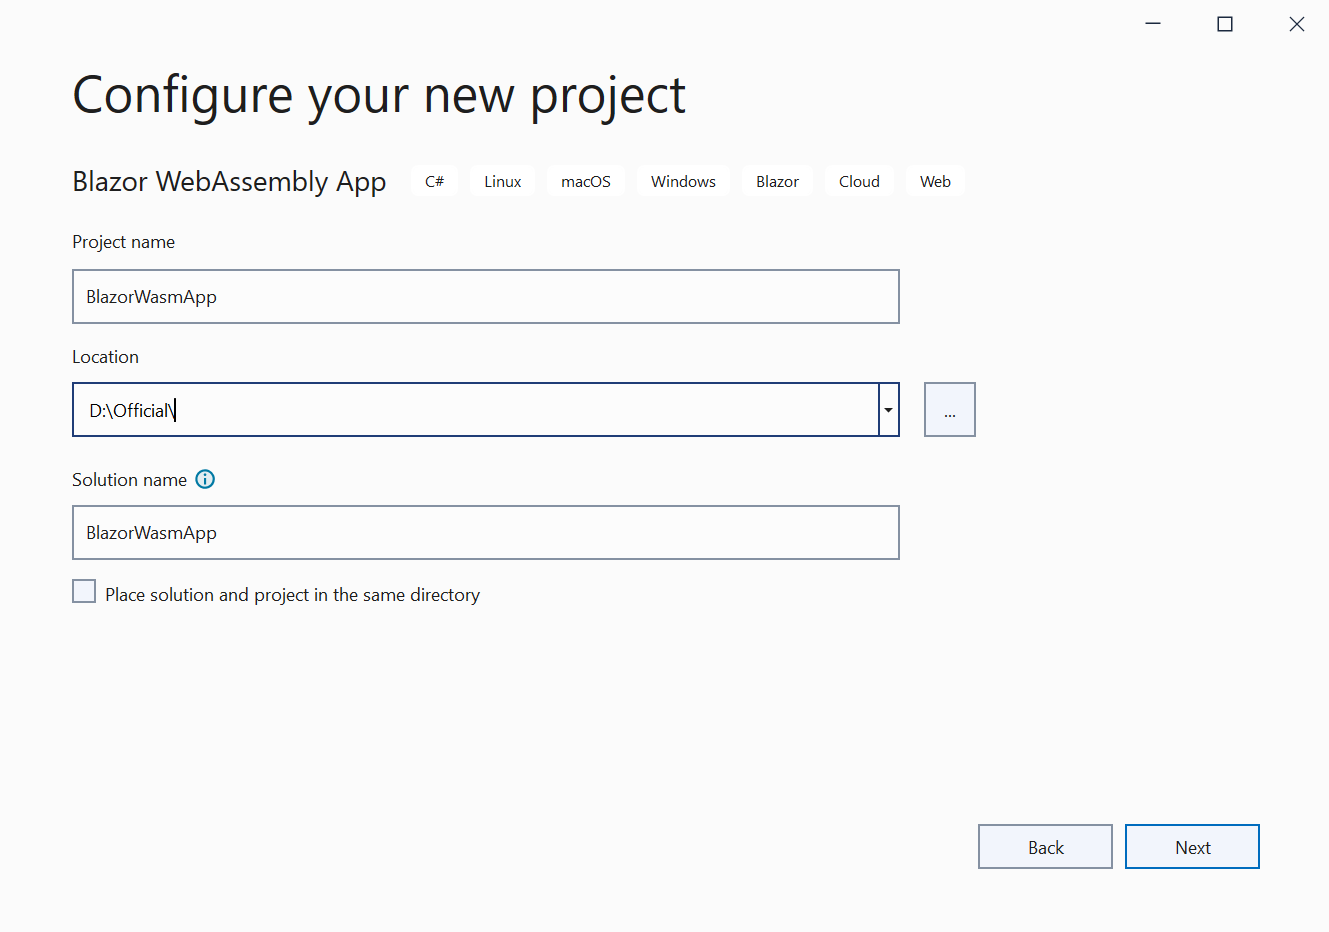 Configuring the project in Visual Studio